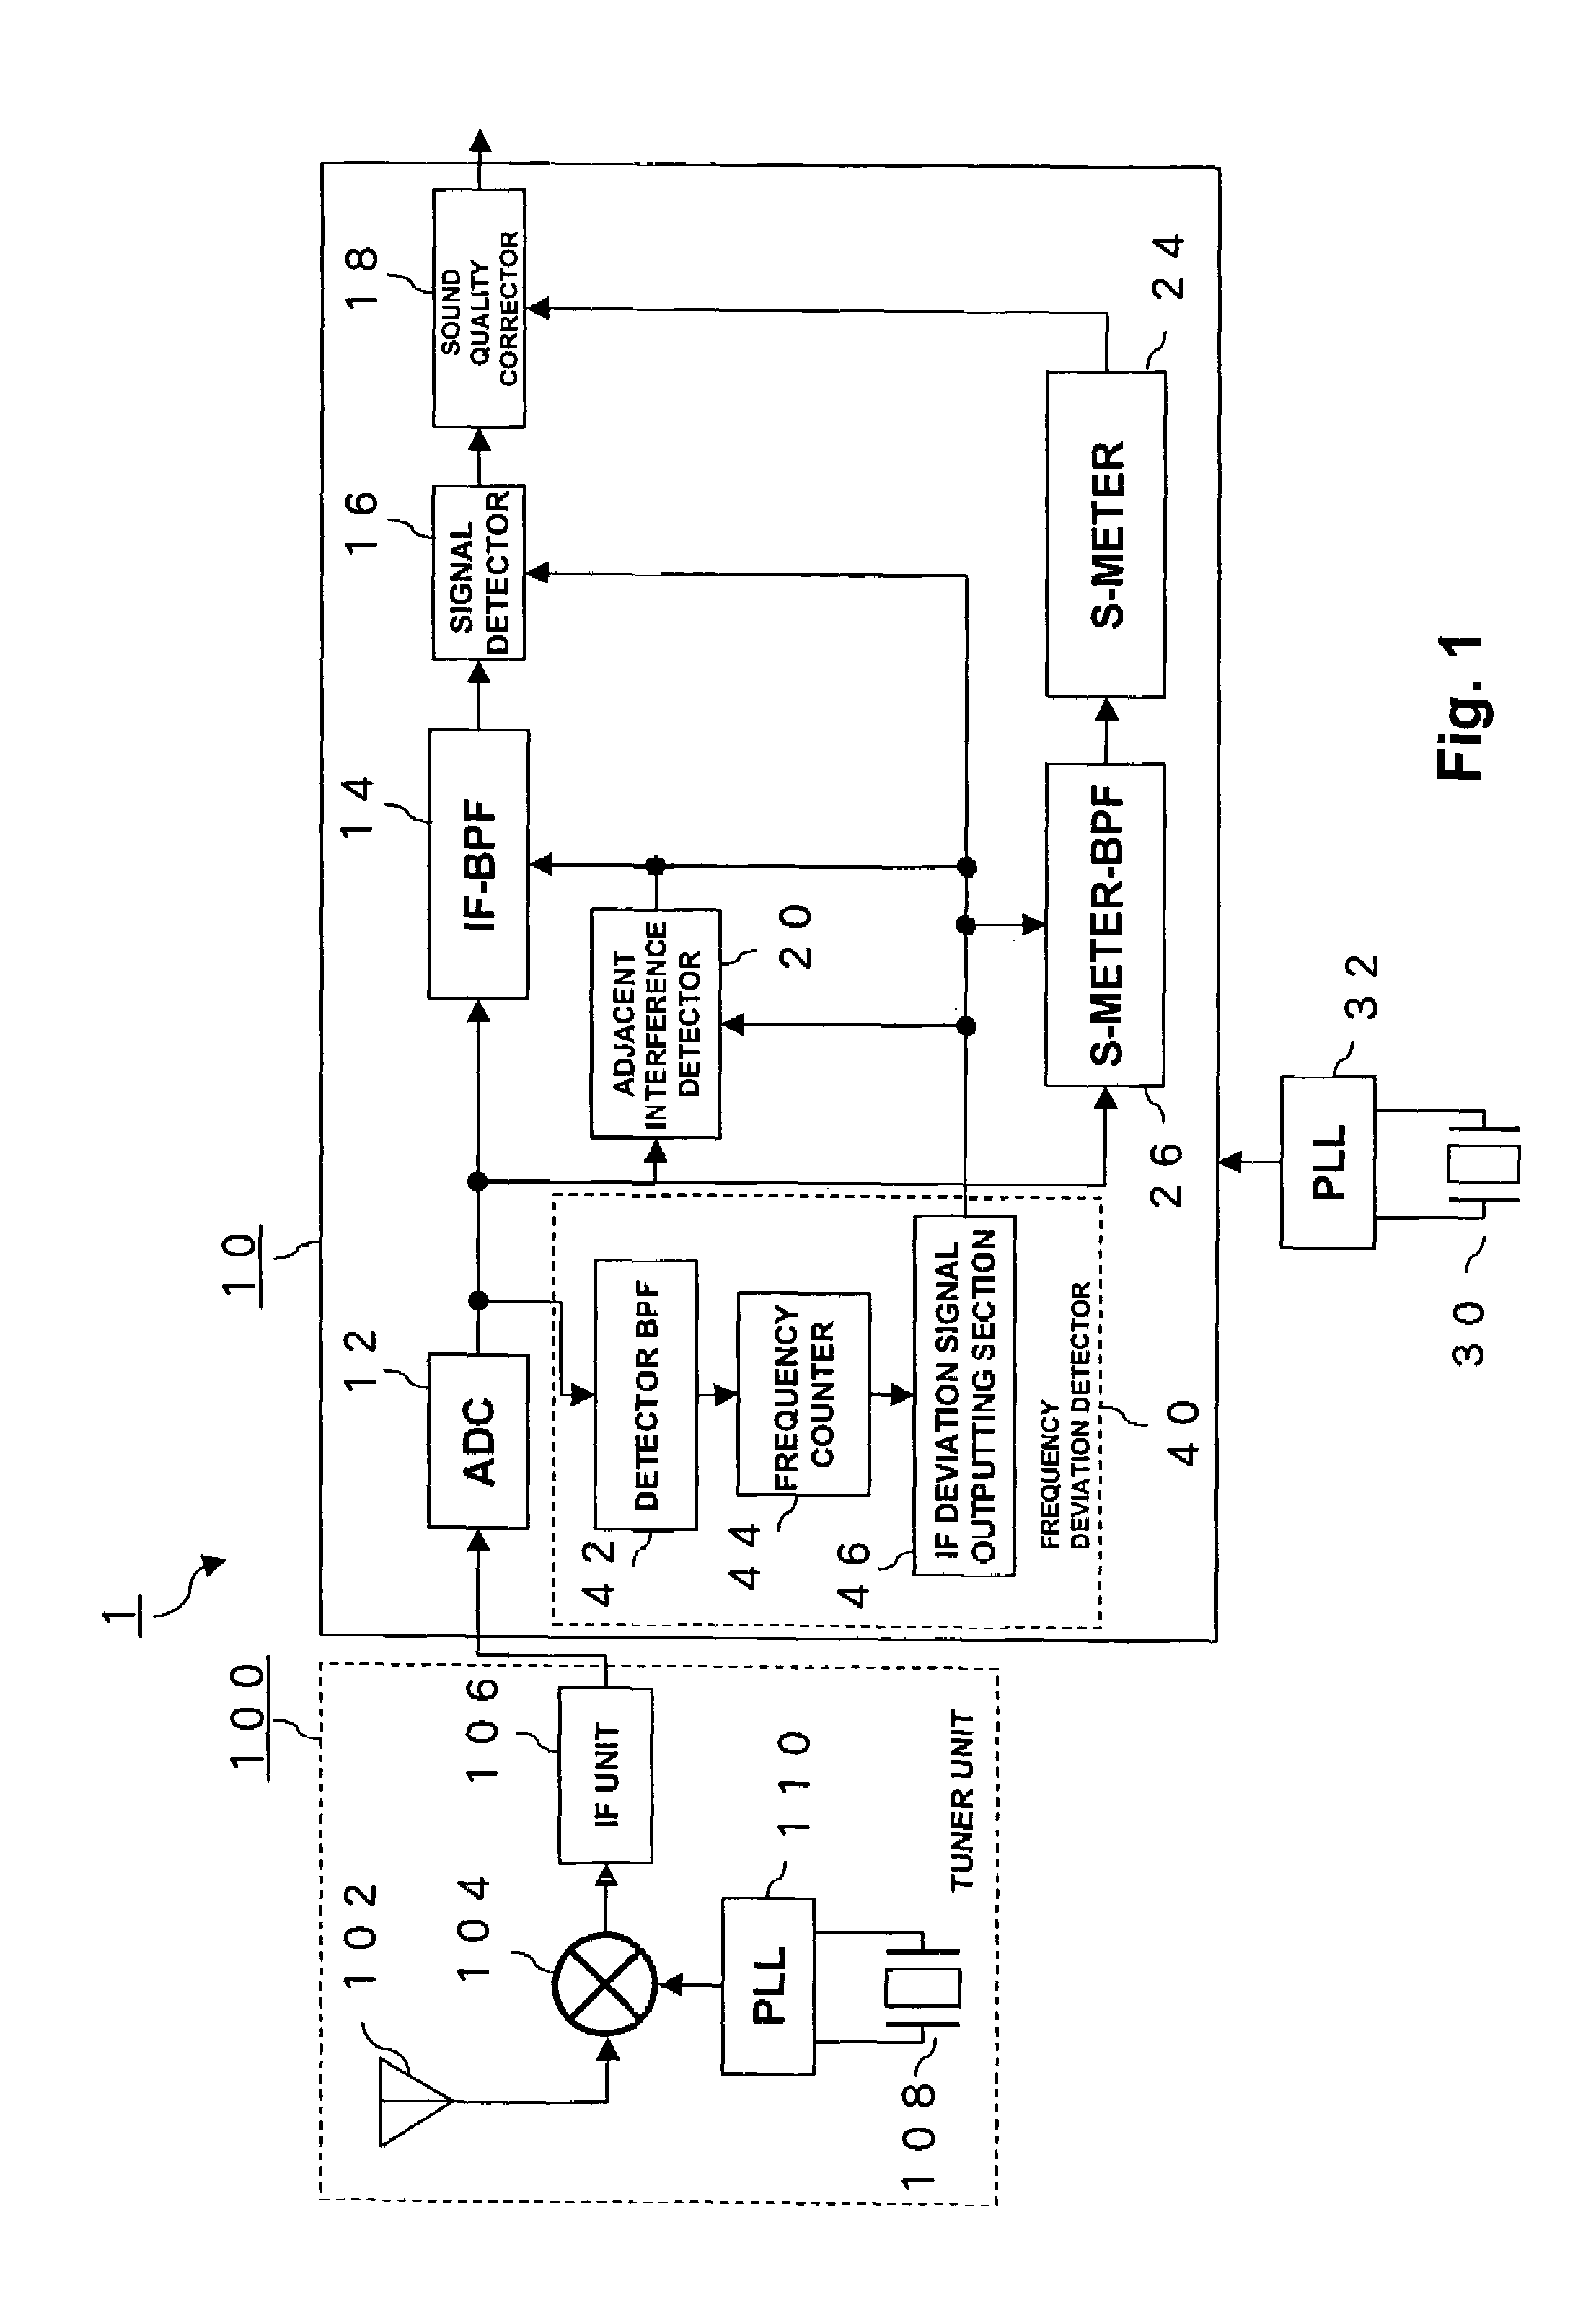 Signal processing circuit for tuner which applies signal processing based on variation in frequency of intermediate frequency signal